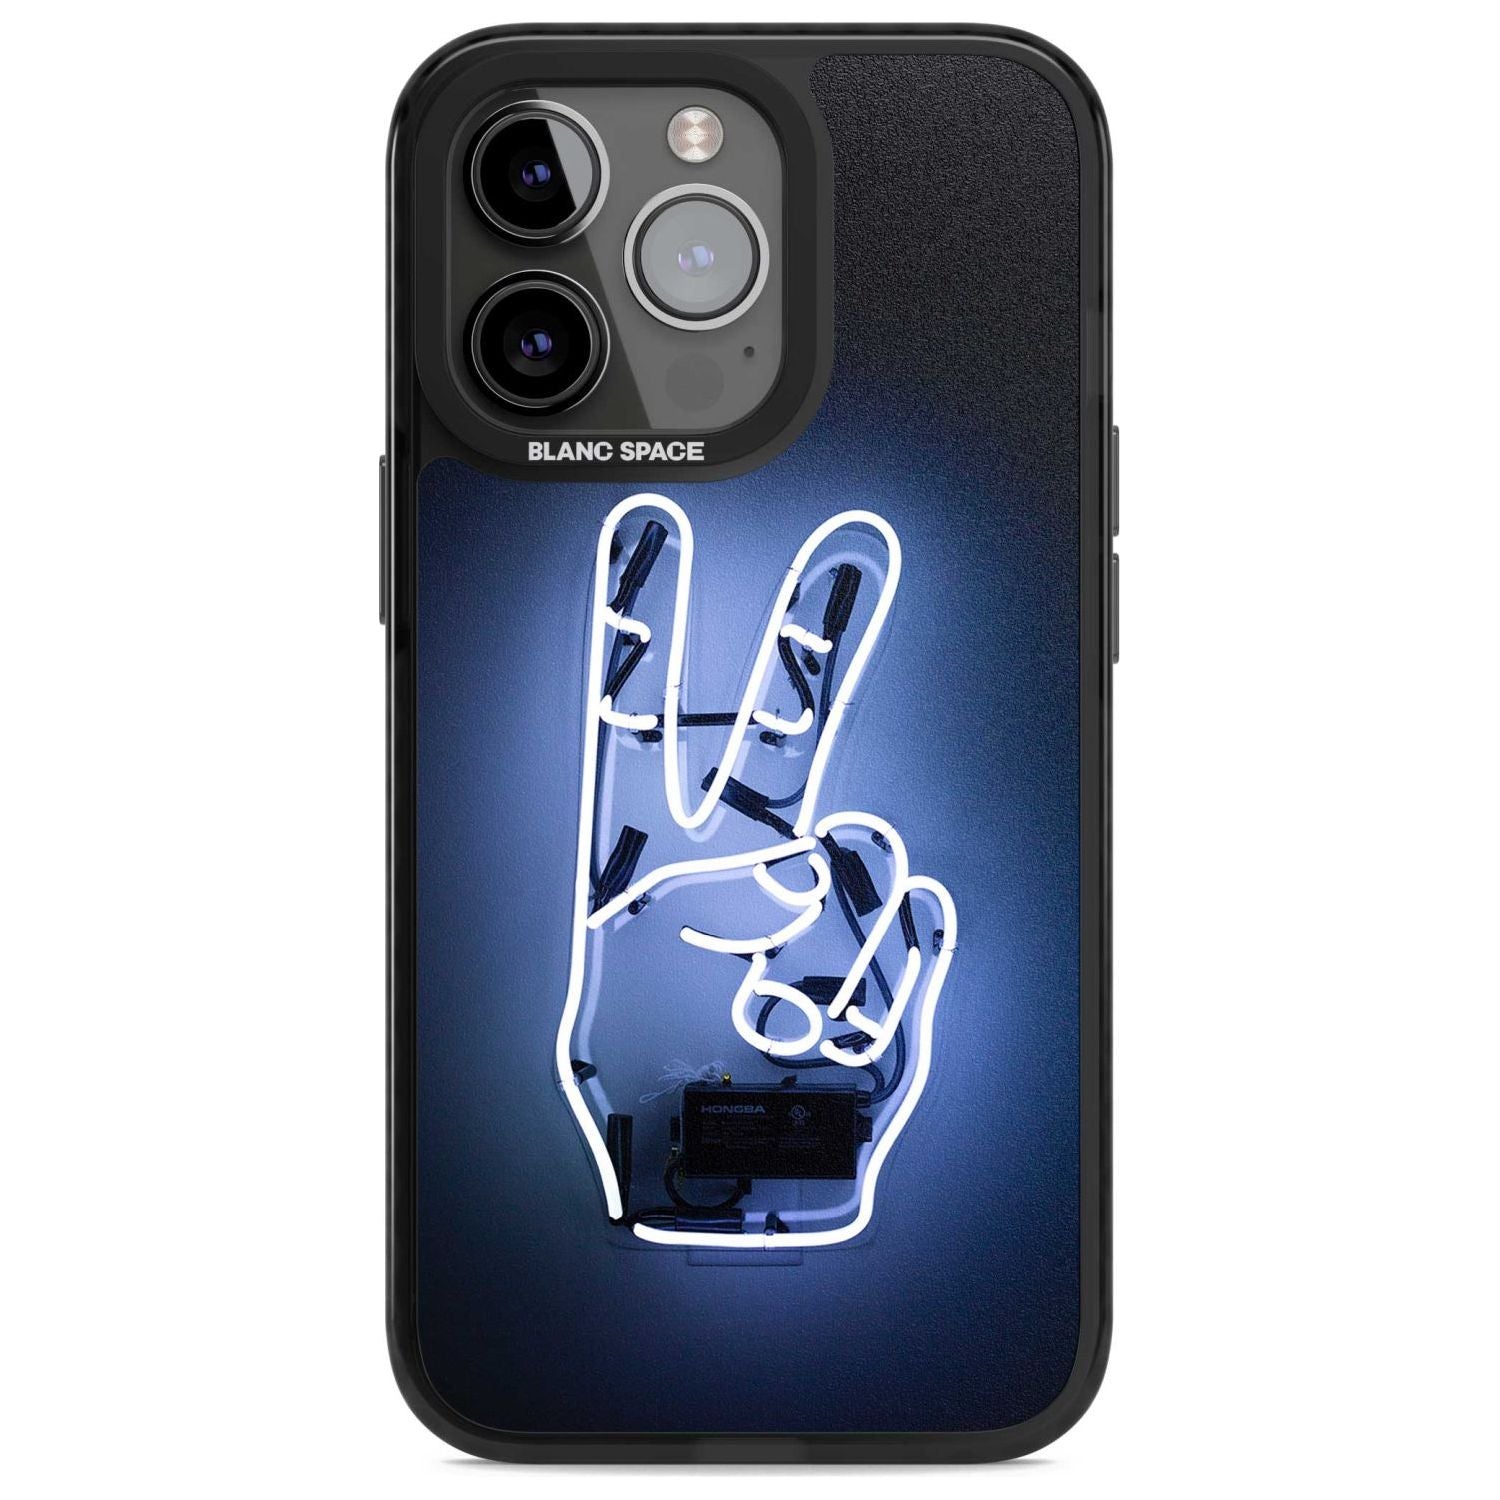 Peace Sign Hand Neon Sign Phone Case iPhone 15 Pro Max / Magsafe Black Impact Case,iPhone 15 Pro / Magsafe Black Impact Case,iPhone 14 Pro Max / Magsafe Black Impact Case,iPhone 14 Pro / Magsafe Black Impact Case,iPhone 13 Pro / Magsafe Black Impact Case Blanc Space